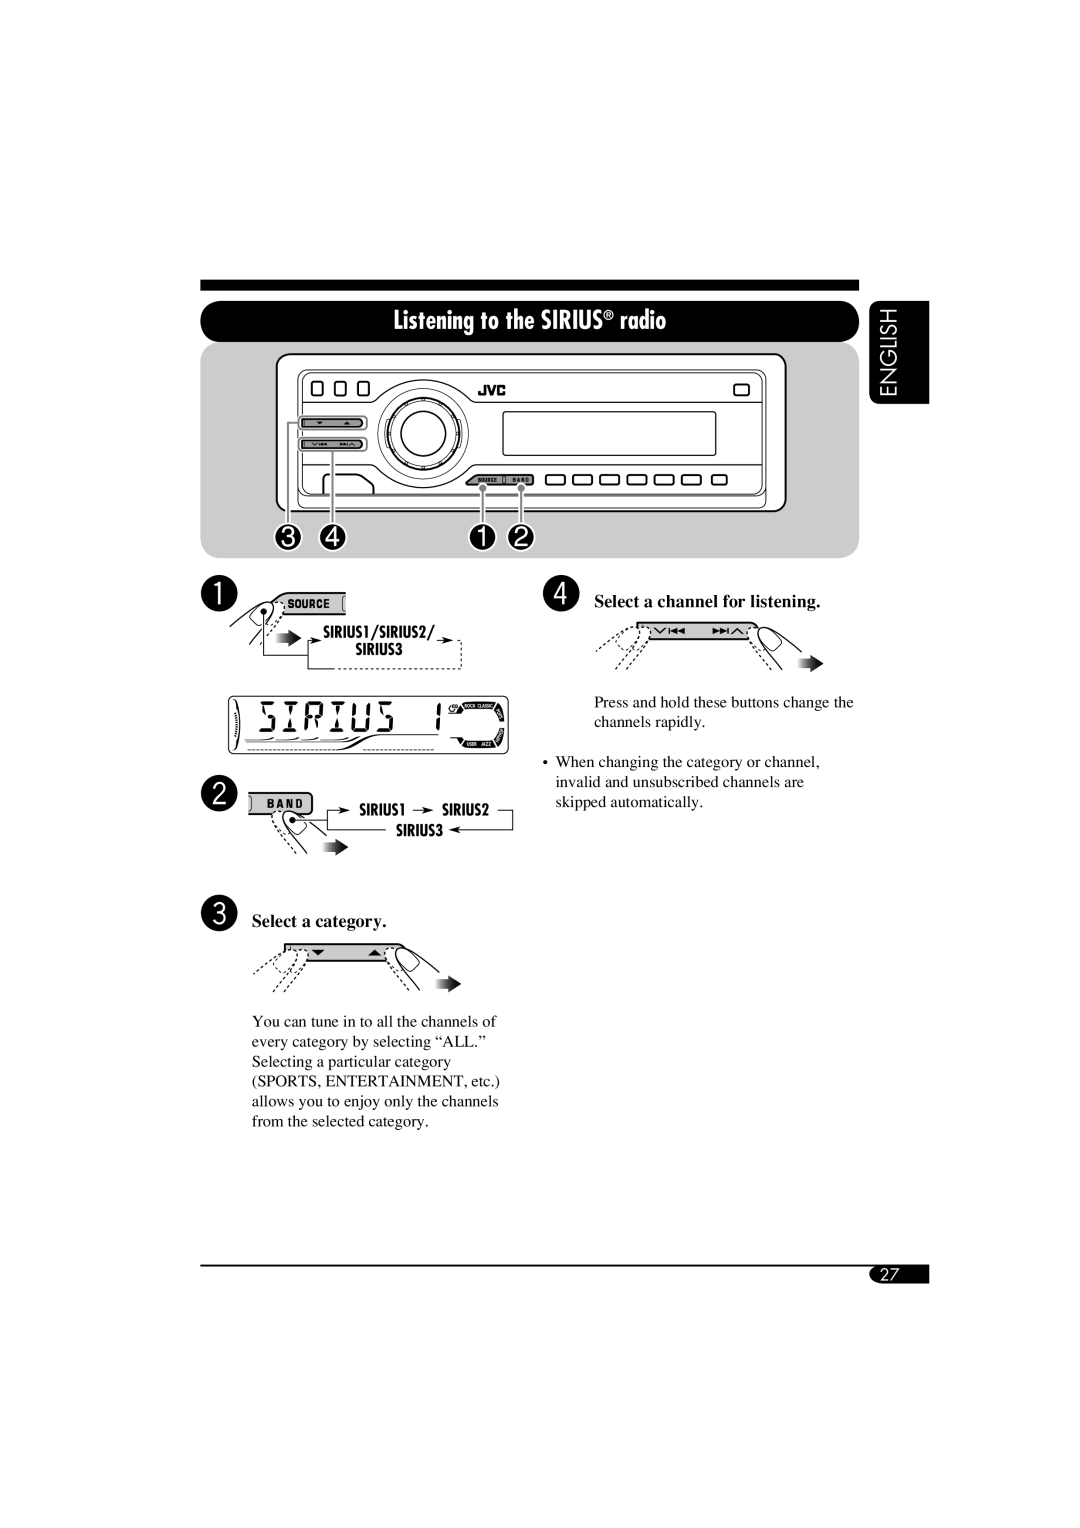 JVC KD-S51 manual Listening to the SIRIUS radio, English, Select a category, ⁄Select a channel for listening 